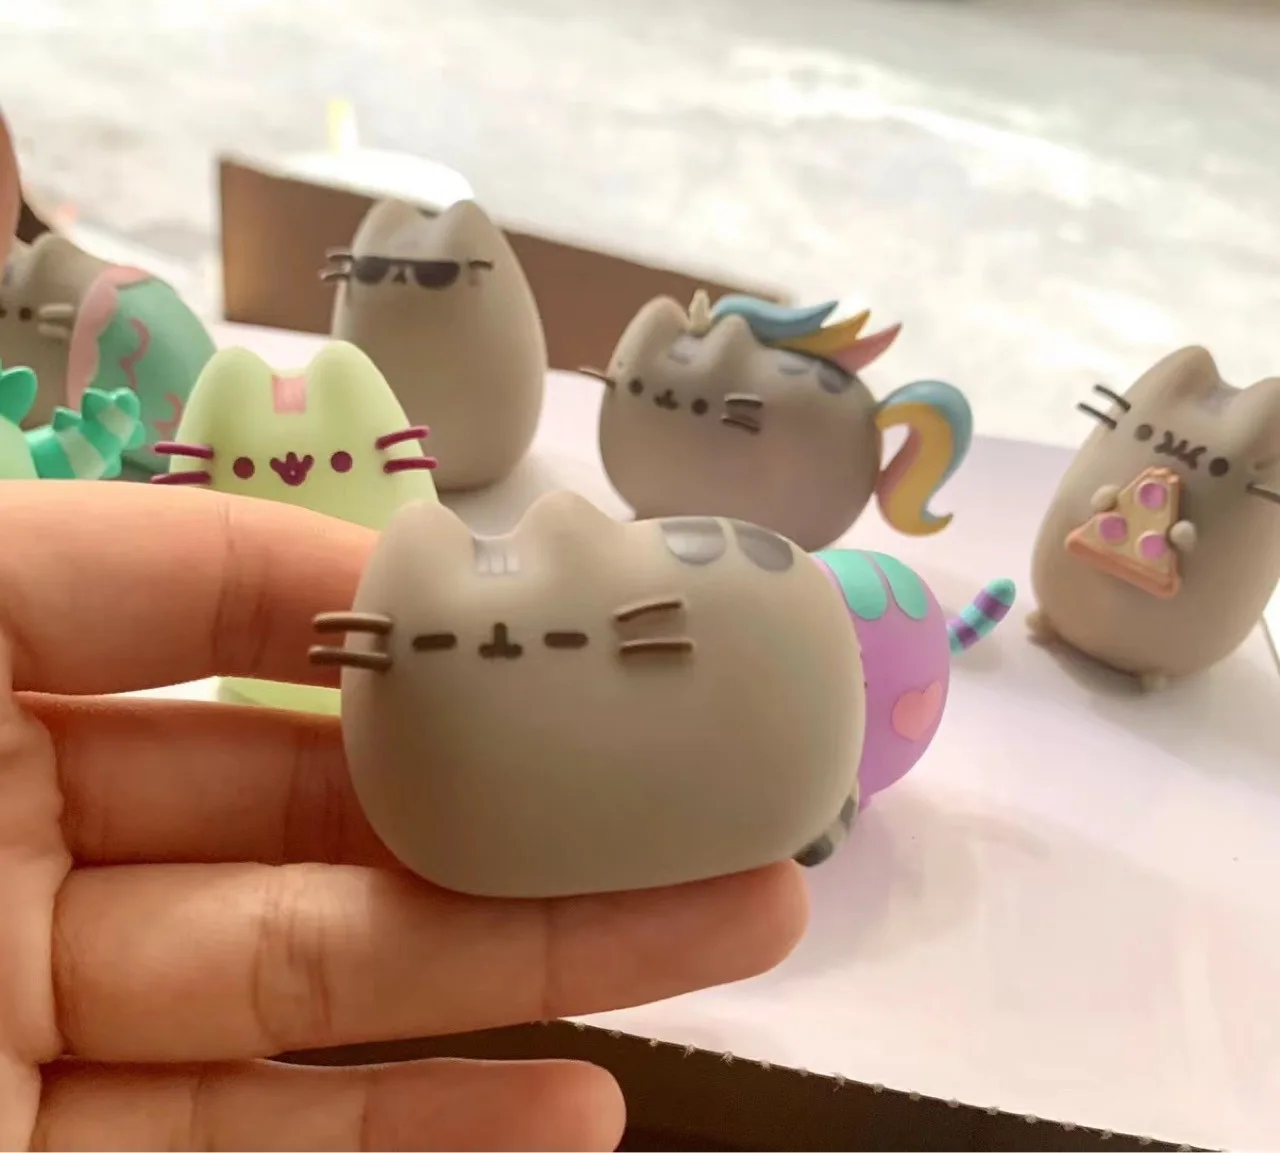 5pcs Cute pusheen the cat creative colorful kawaii  figure model toys doll houseware decoration birthday gift for girl images - 6